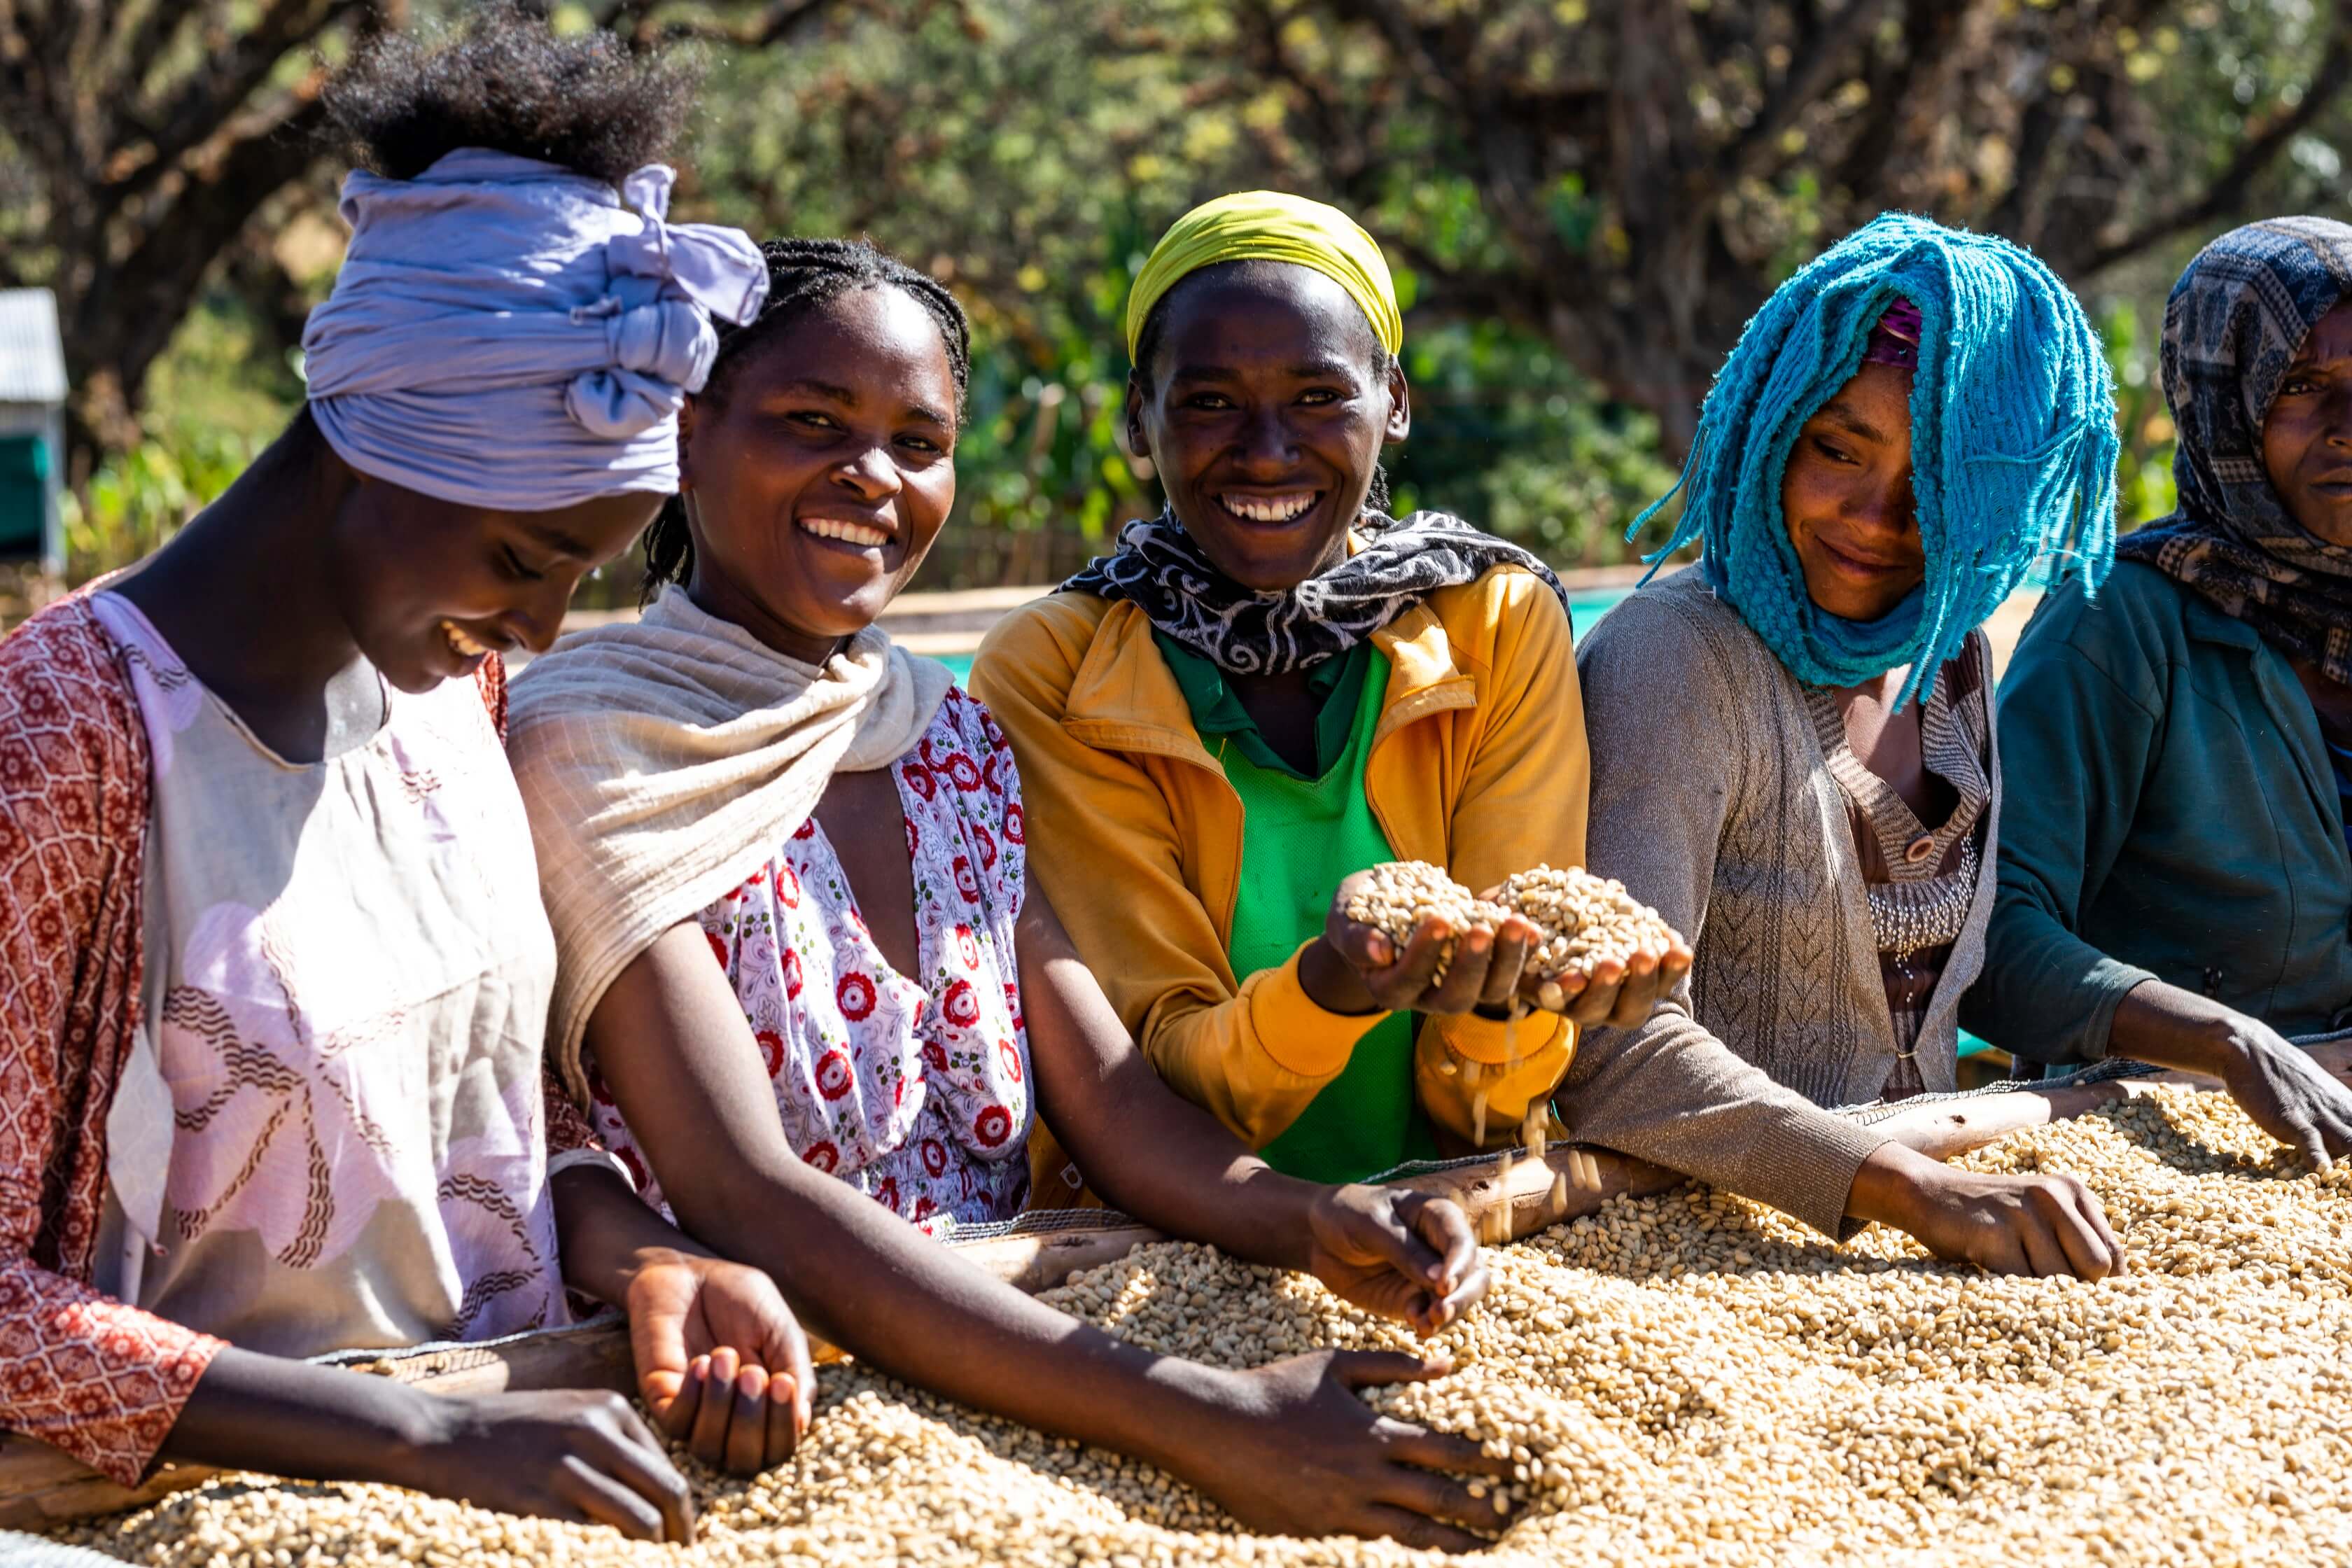 Women’s contribution to the coffee industry